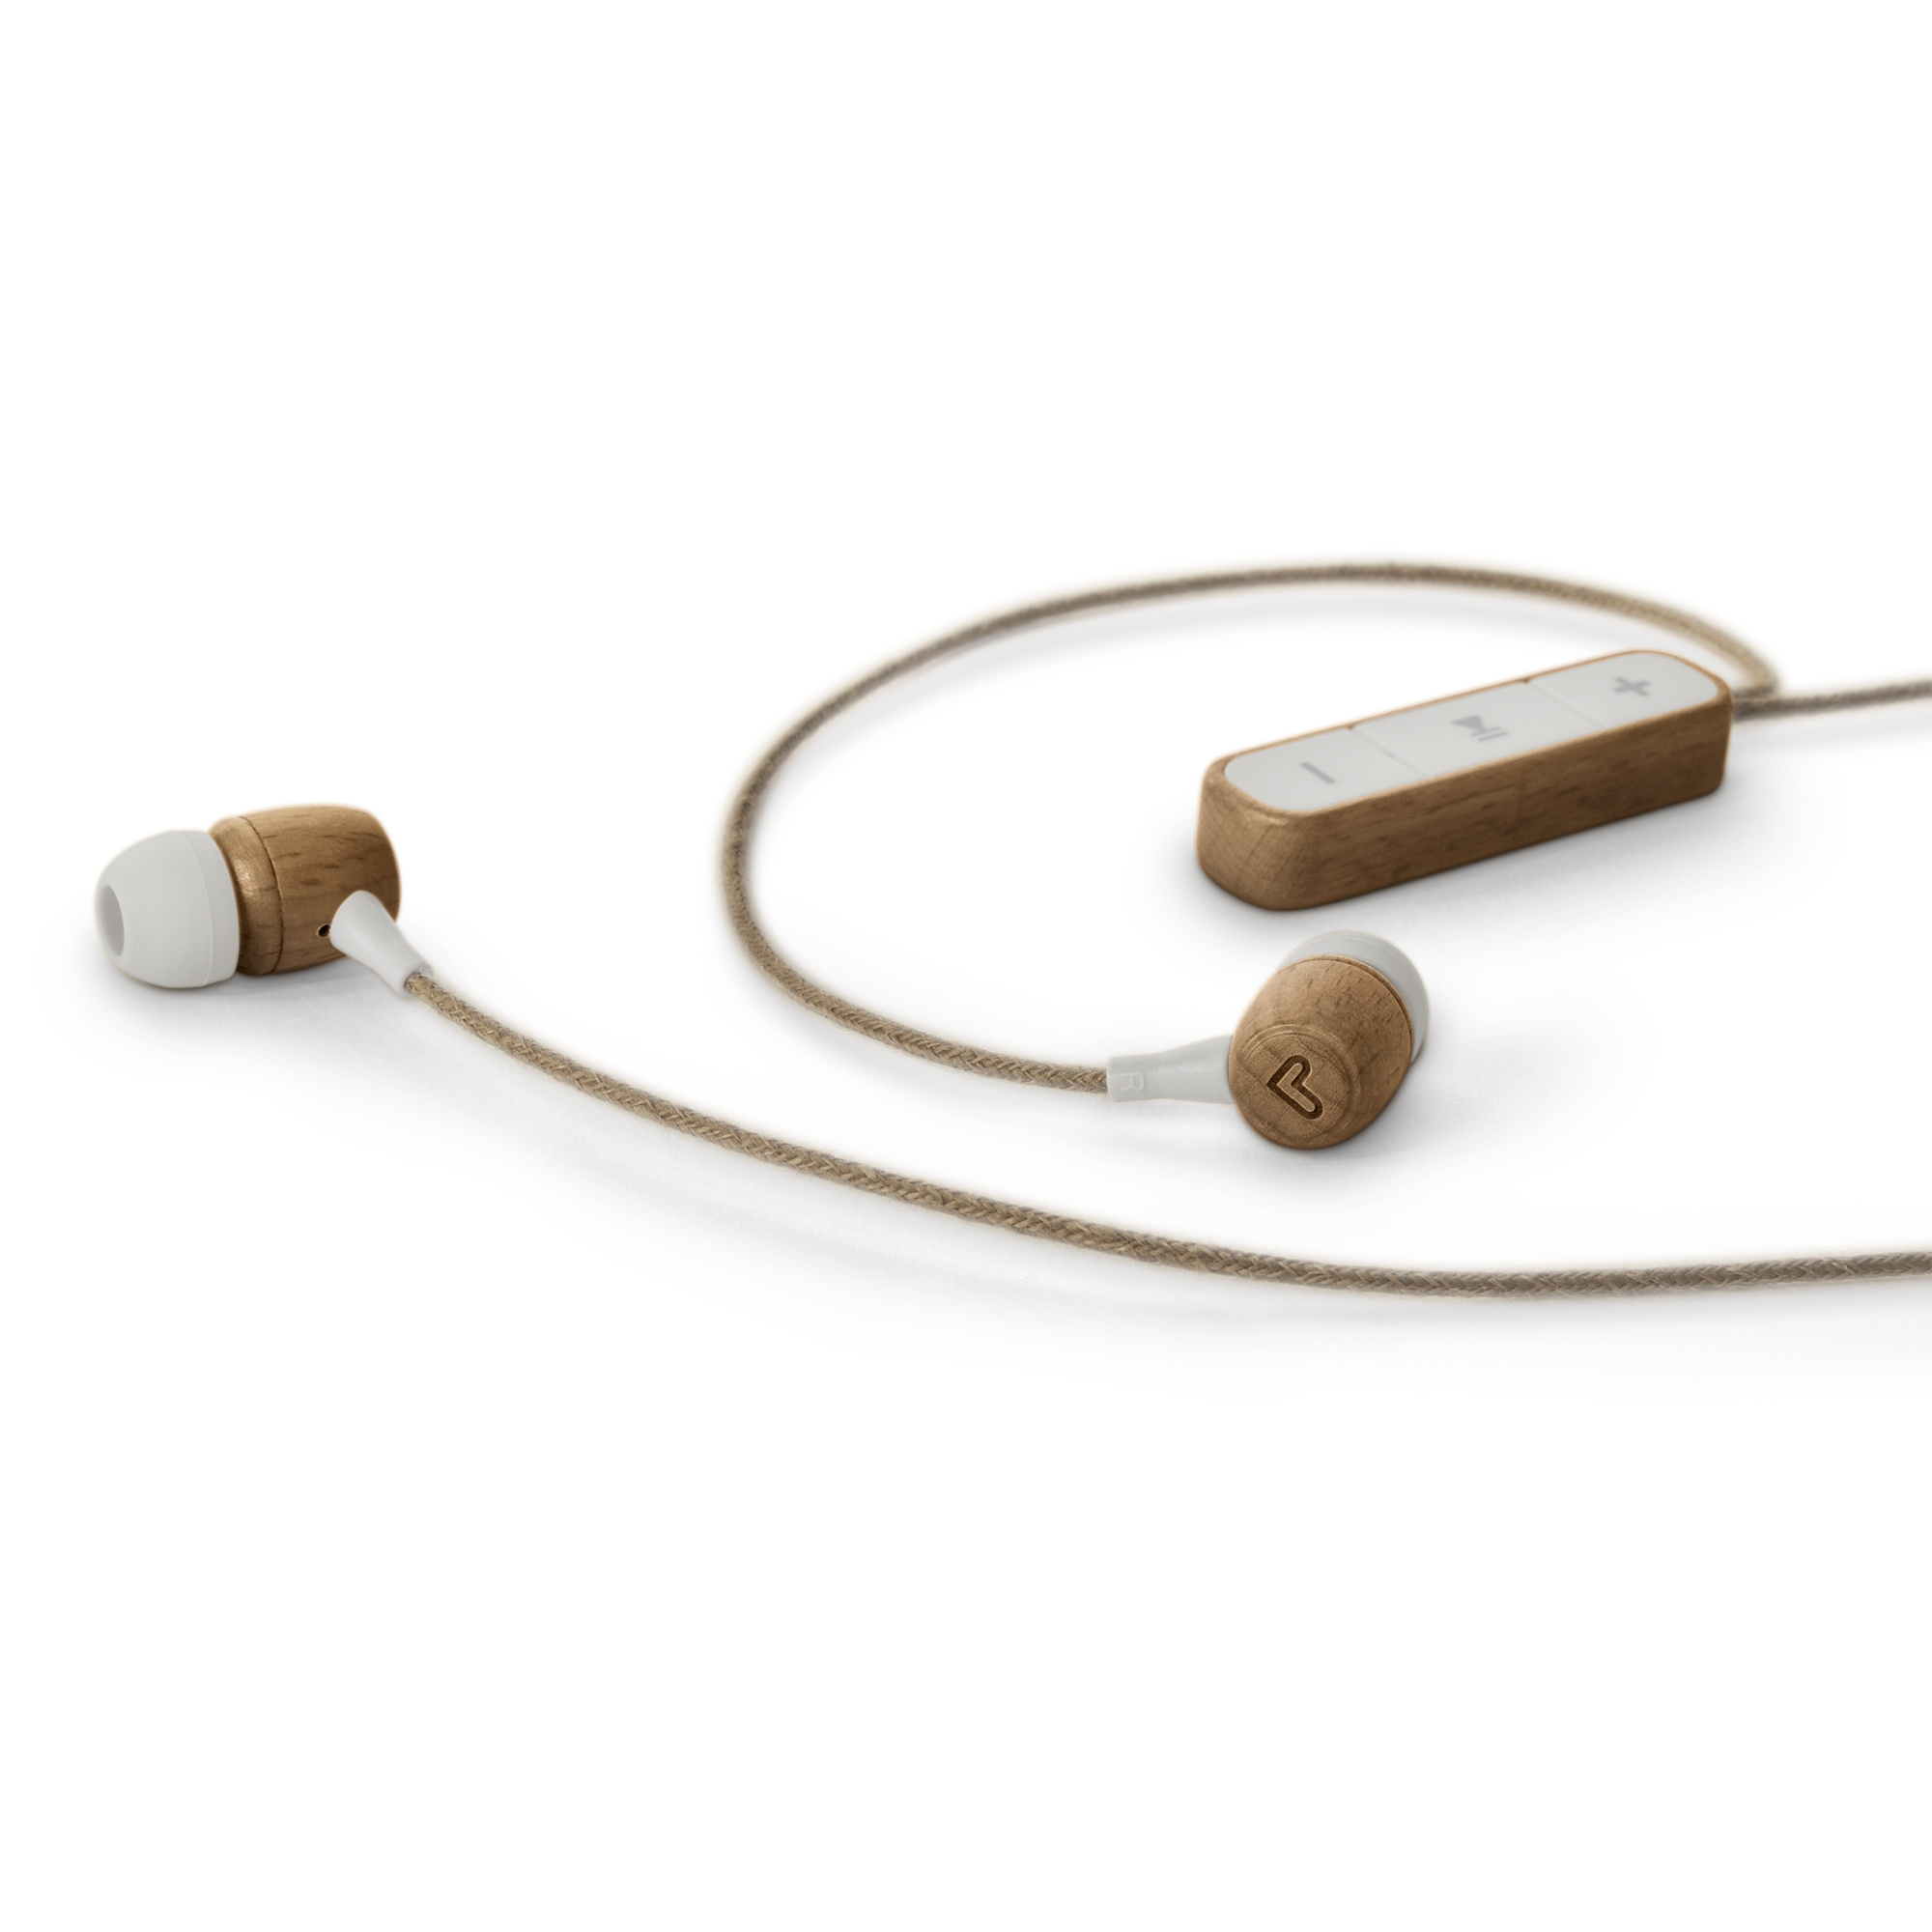 Bluetooth earphones featuring a hemp cable and wood housing